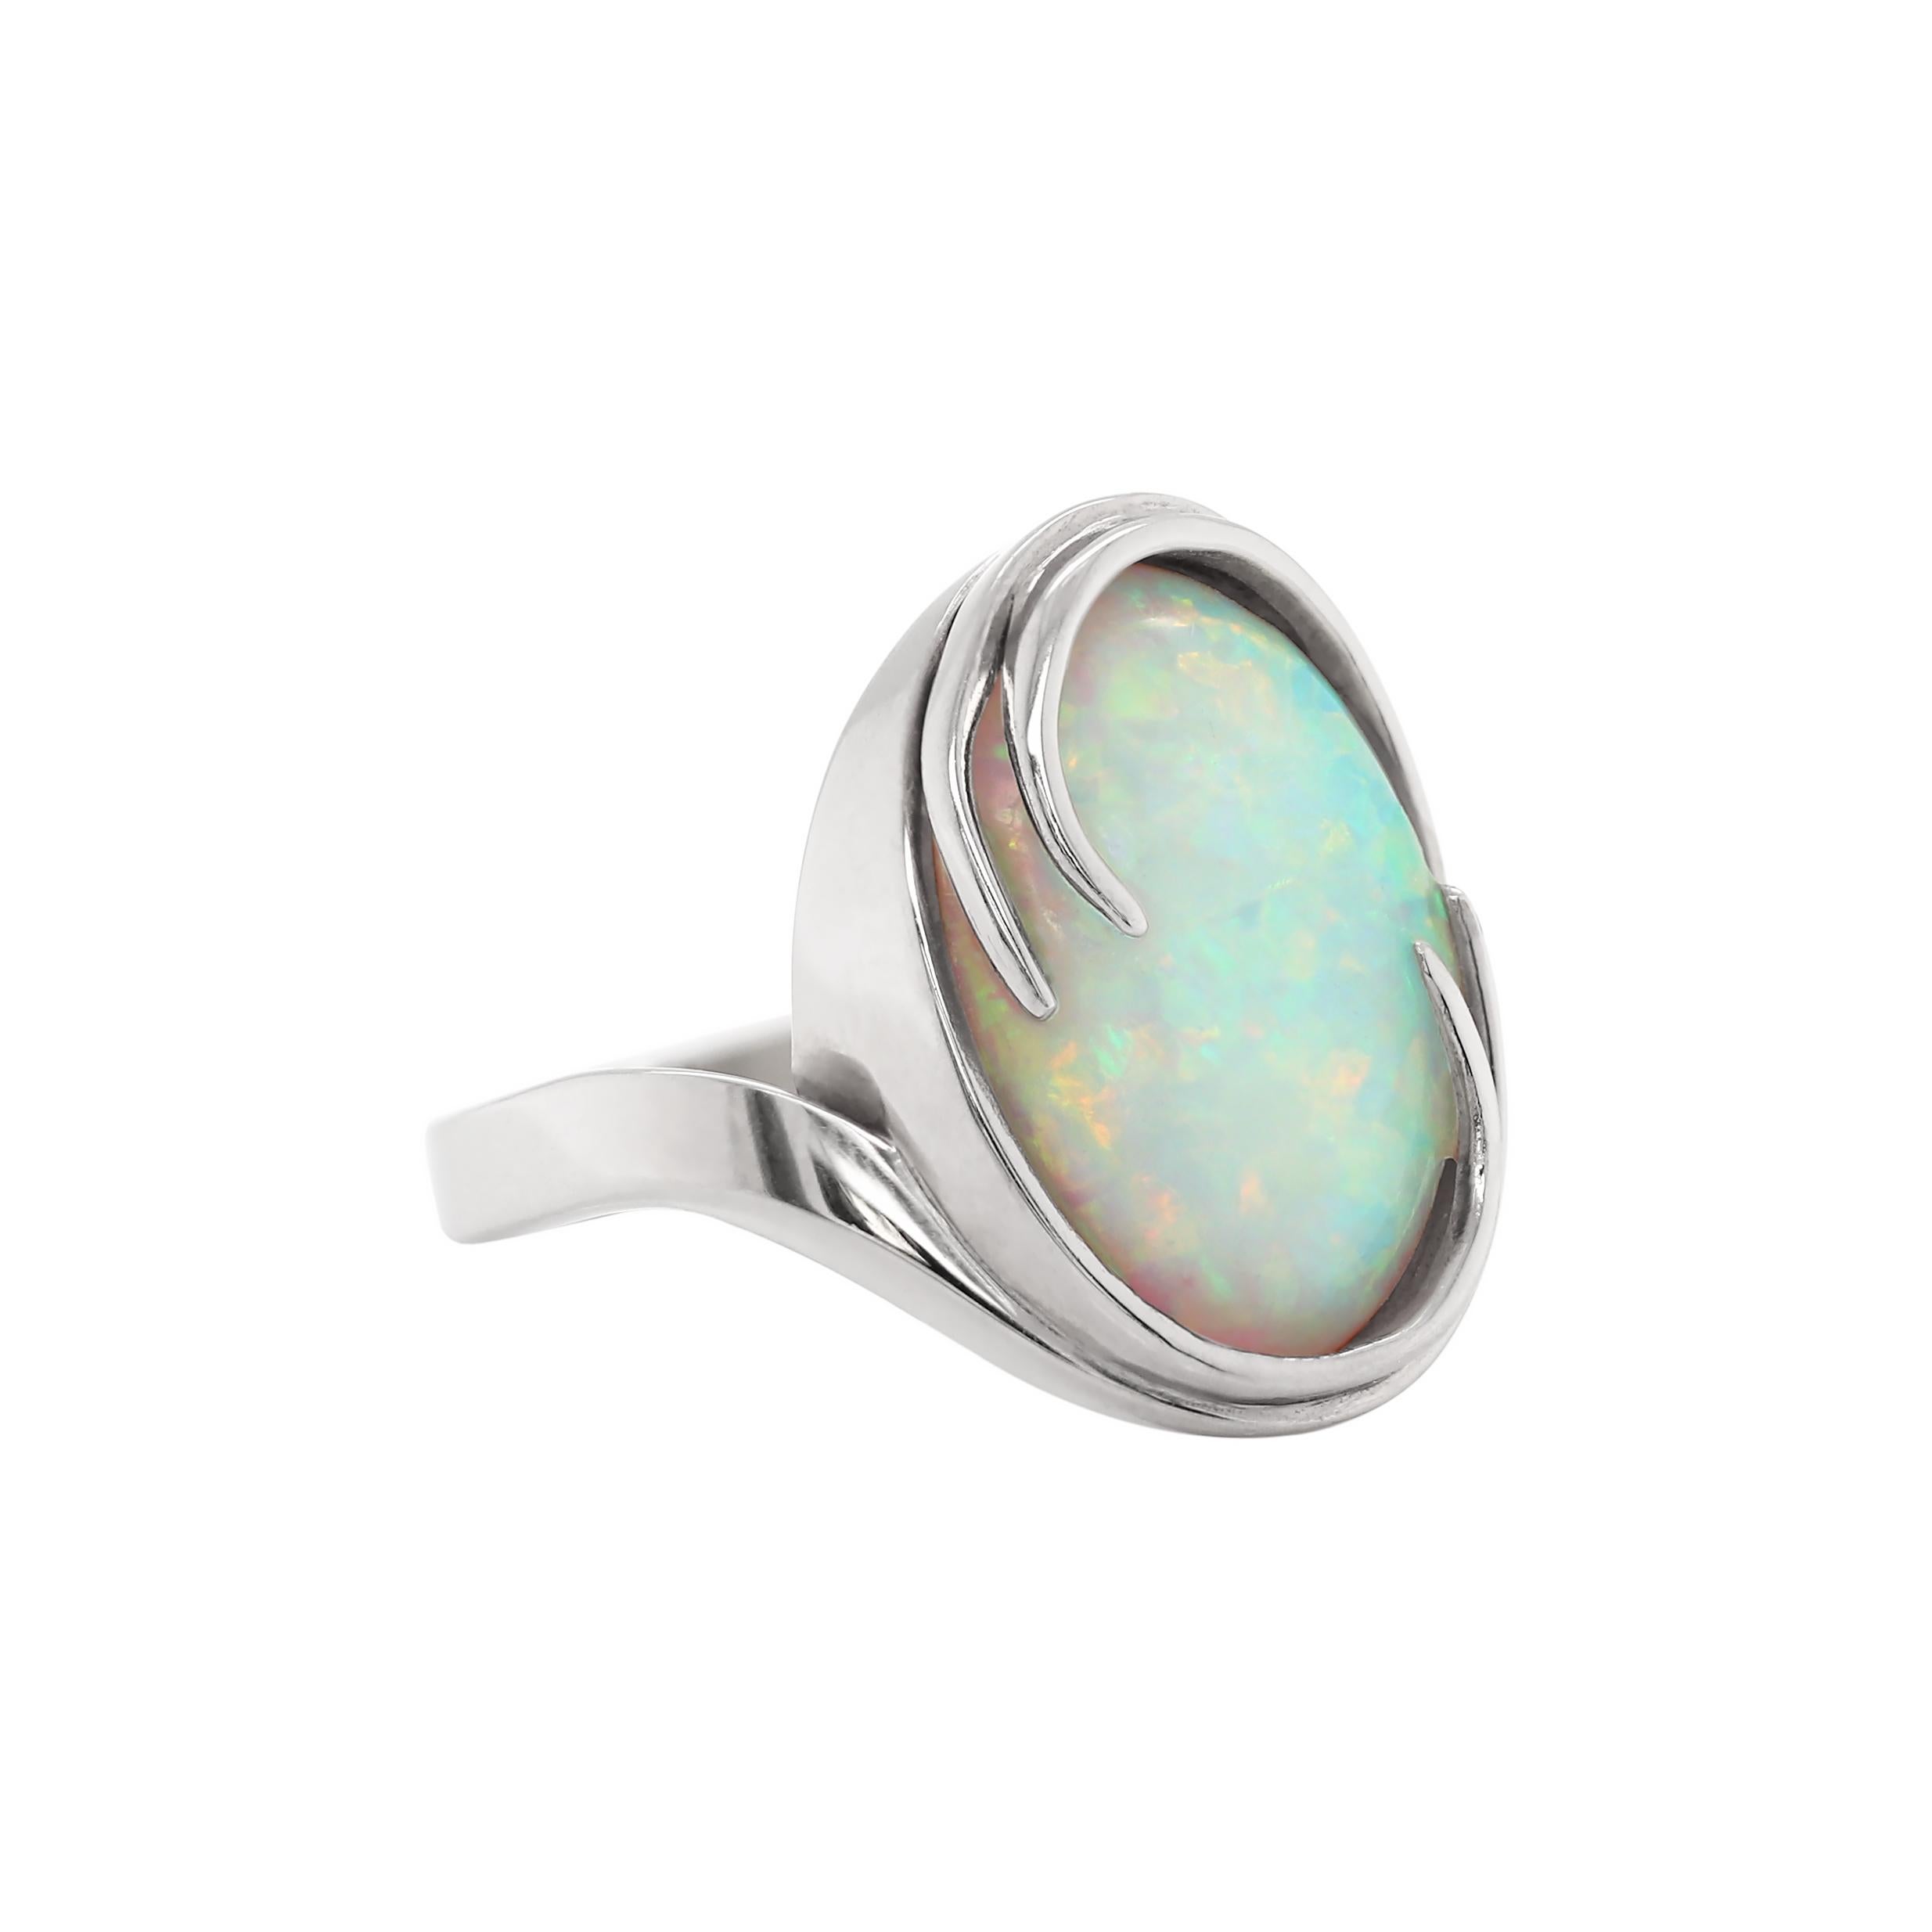 This beautifully modern handmade ring features a lustrous oval cabochon opal weighing an estimated 5.68ct mounted in an 18 carat white gold rubover, open back setting. UK finger size 'N'.